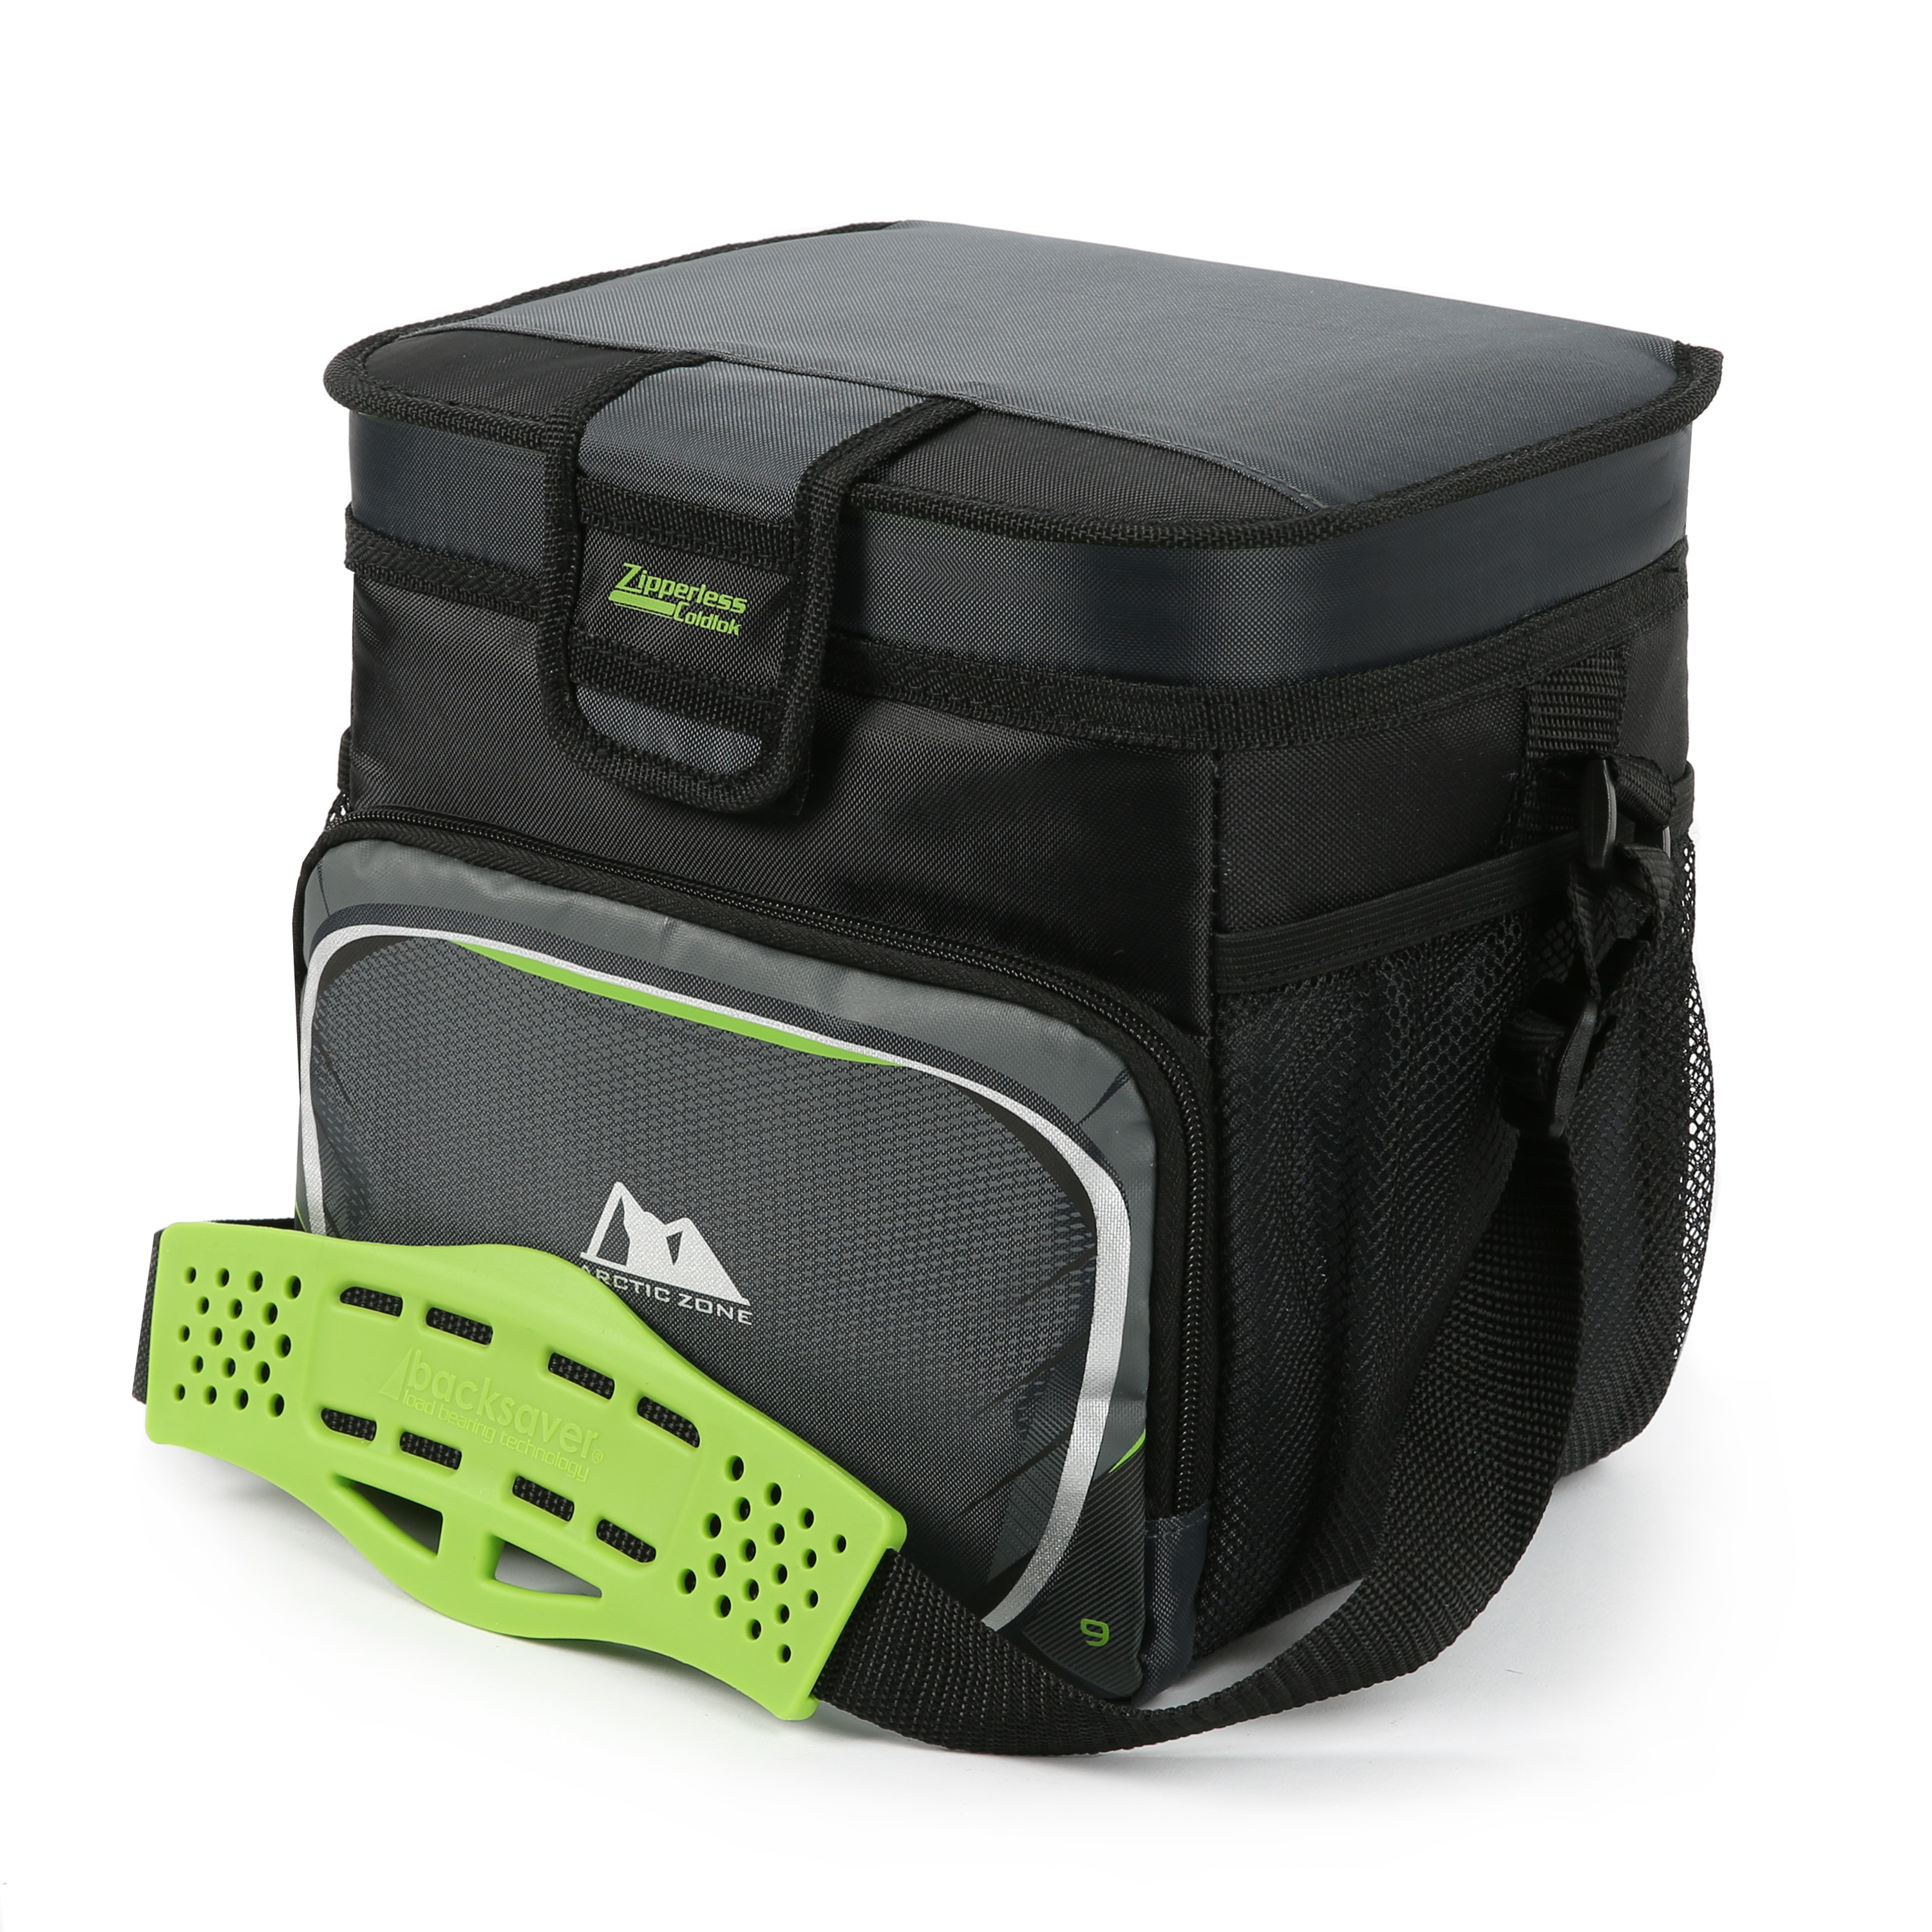 Arctic Zone 9 cans Zipperless Soft Sided Cooler with Hard Liner, Grey and Green - image 2 of 11